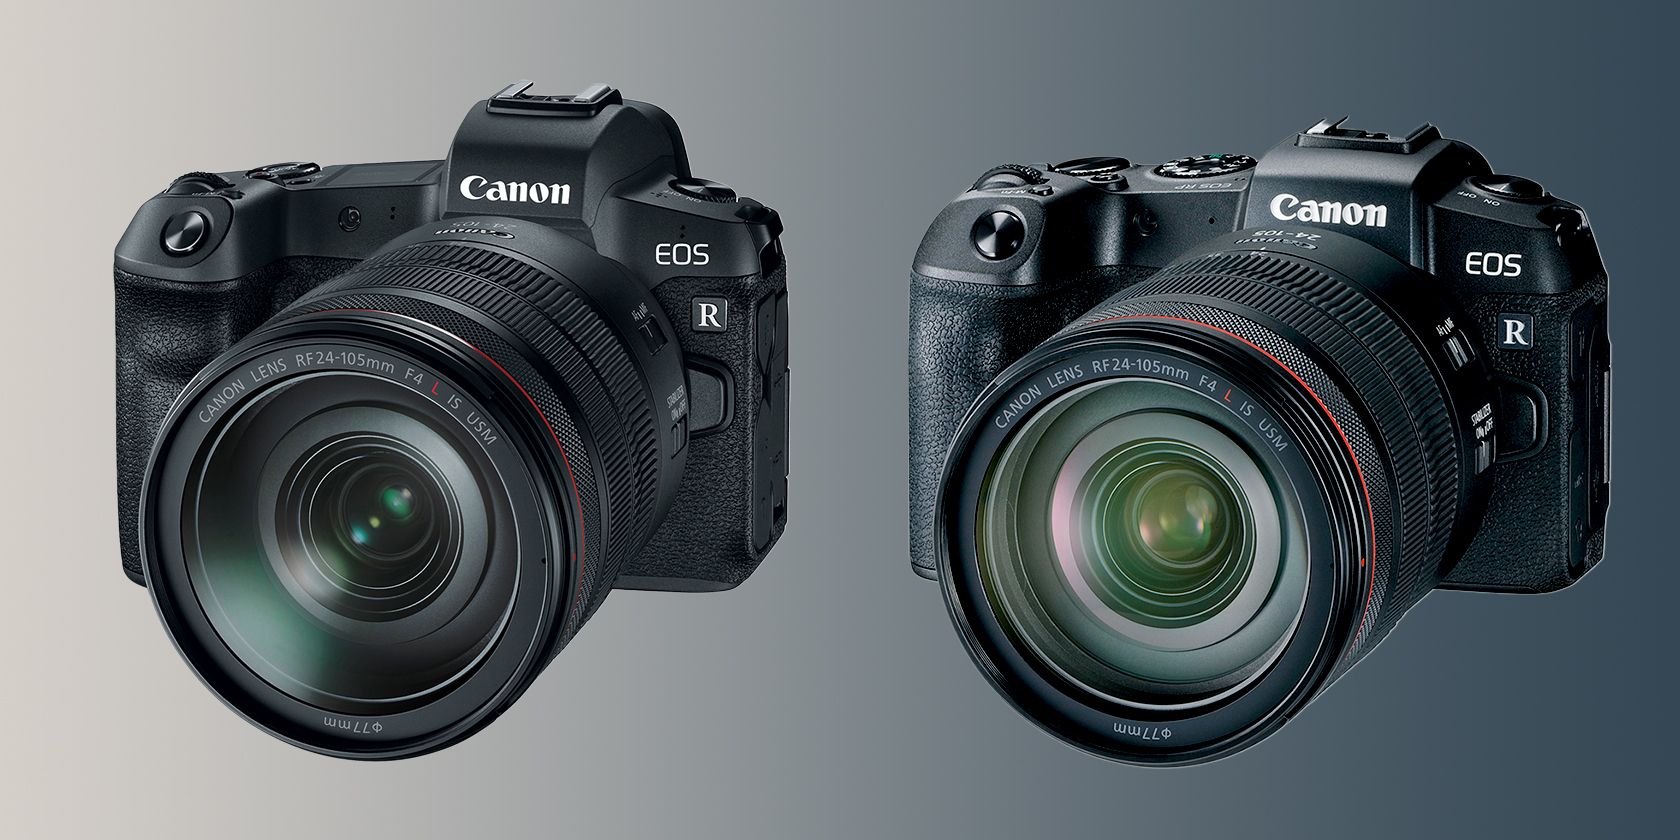 Canon EOS R and Canon EOS RP with 24-105 F4 lens side-by-side view